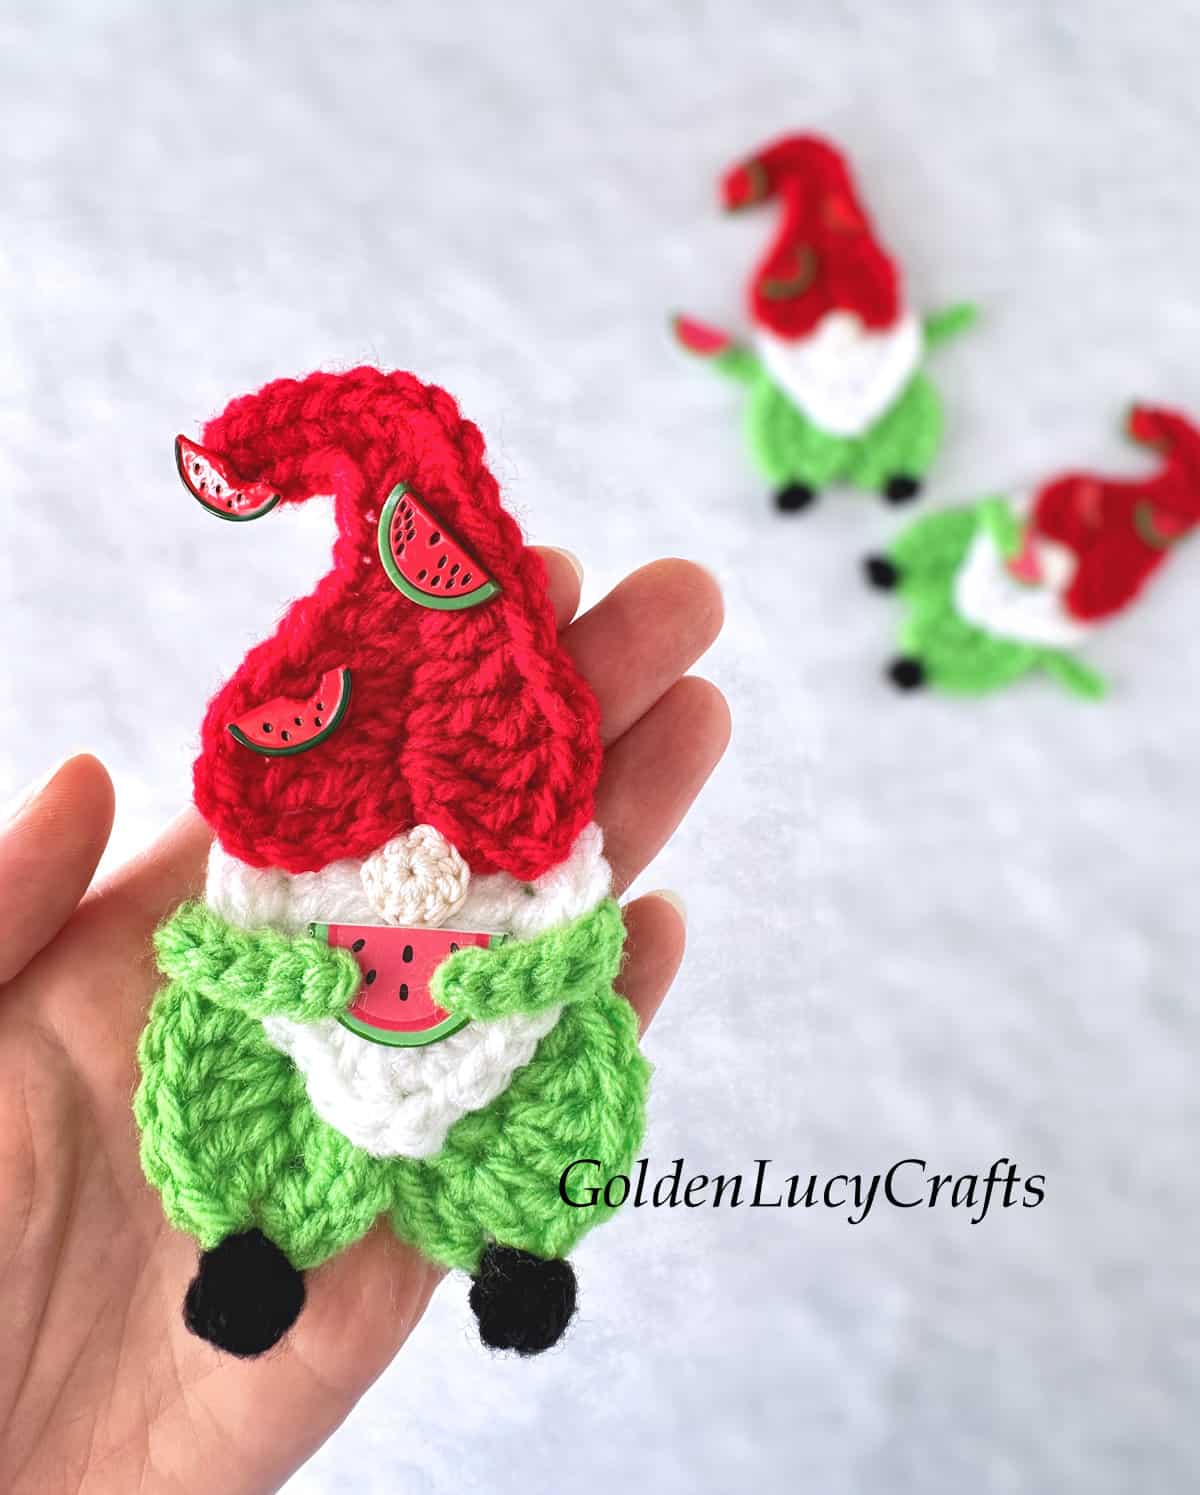 Crocheted gnome in the palm of a hand.